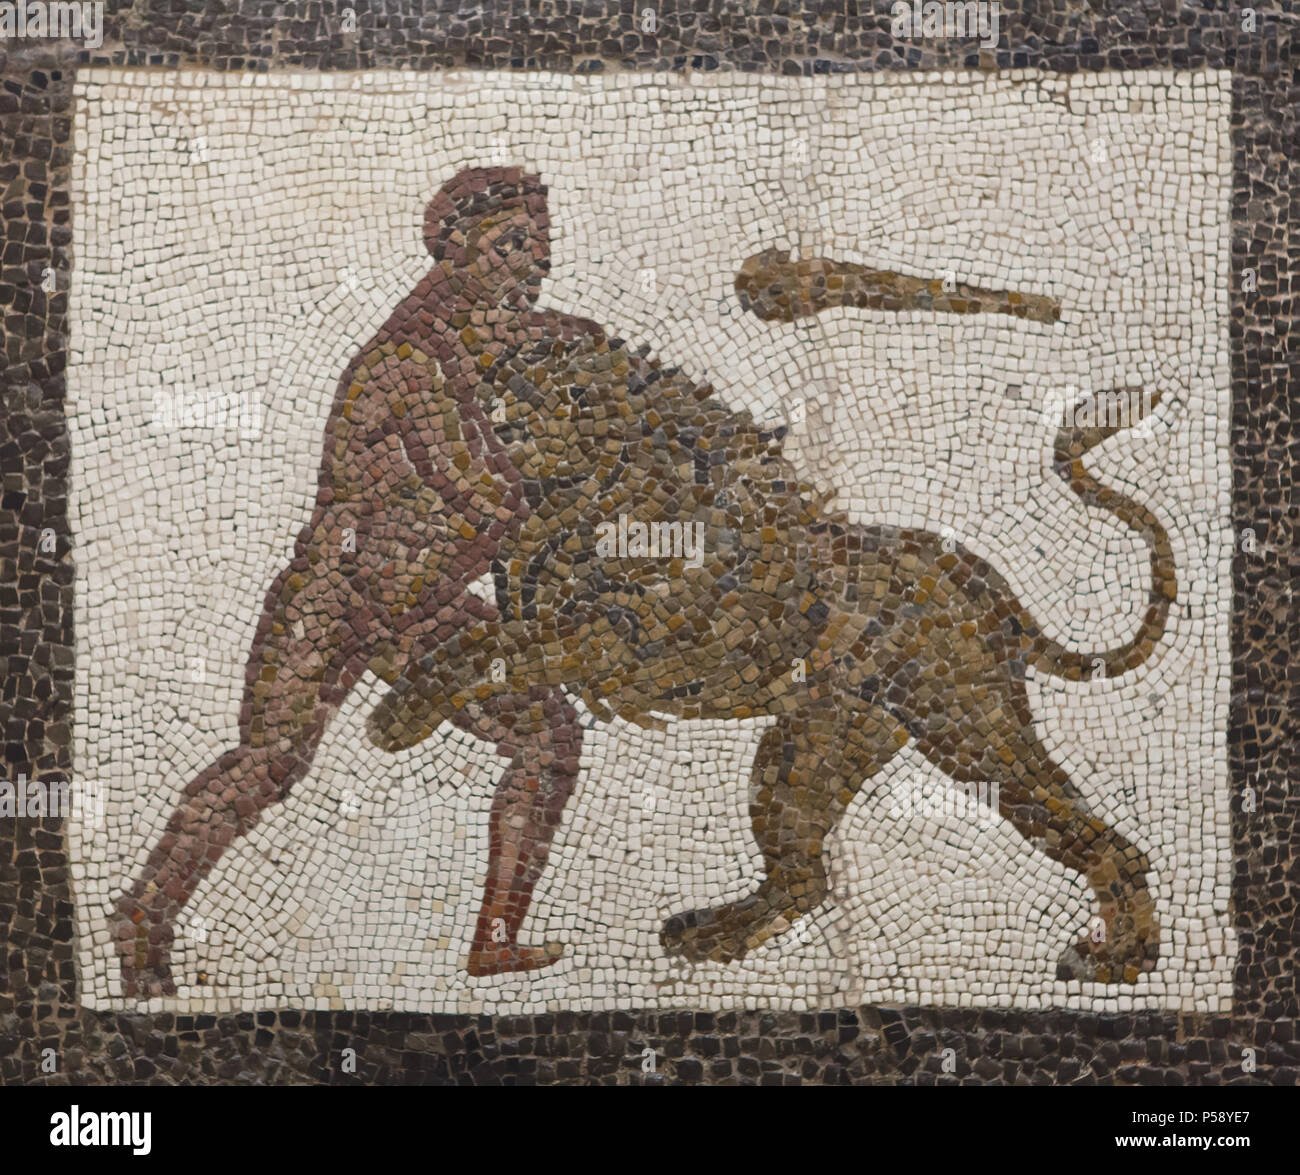 Heracles slaying the Nemean Lion. Labours of Heracles depicted in the Roman mosaic dated from the 3rd century AD from Llíria (Valencia Province, Spain) on display in the National Archaeological Museum (Museo Arqueológico Nacional) in Madrid, Spain. Stock Photo